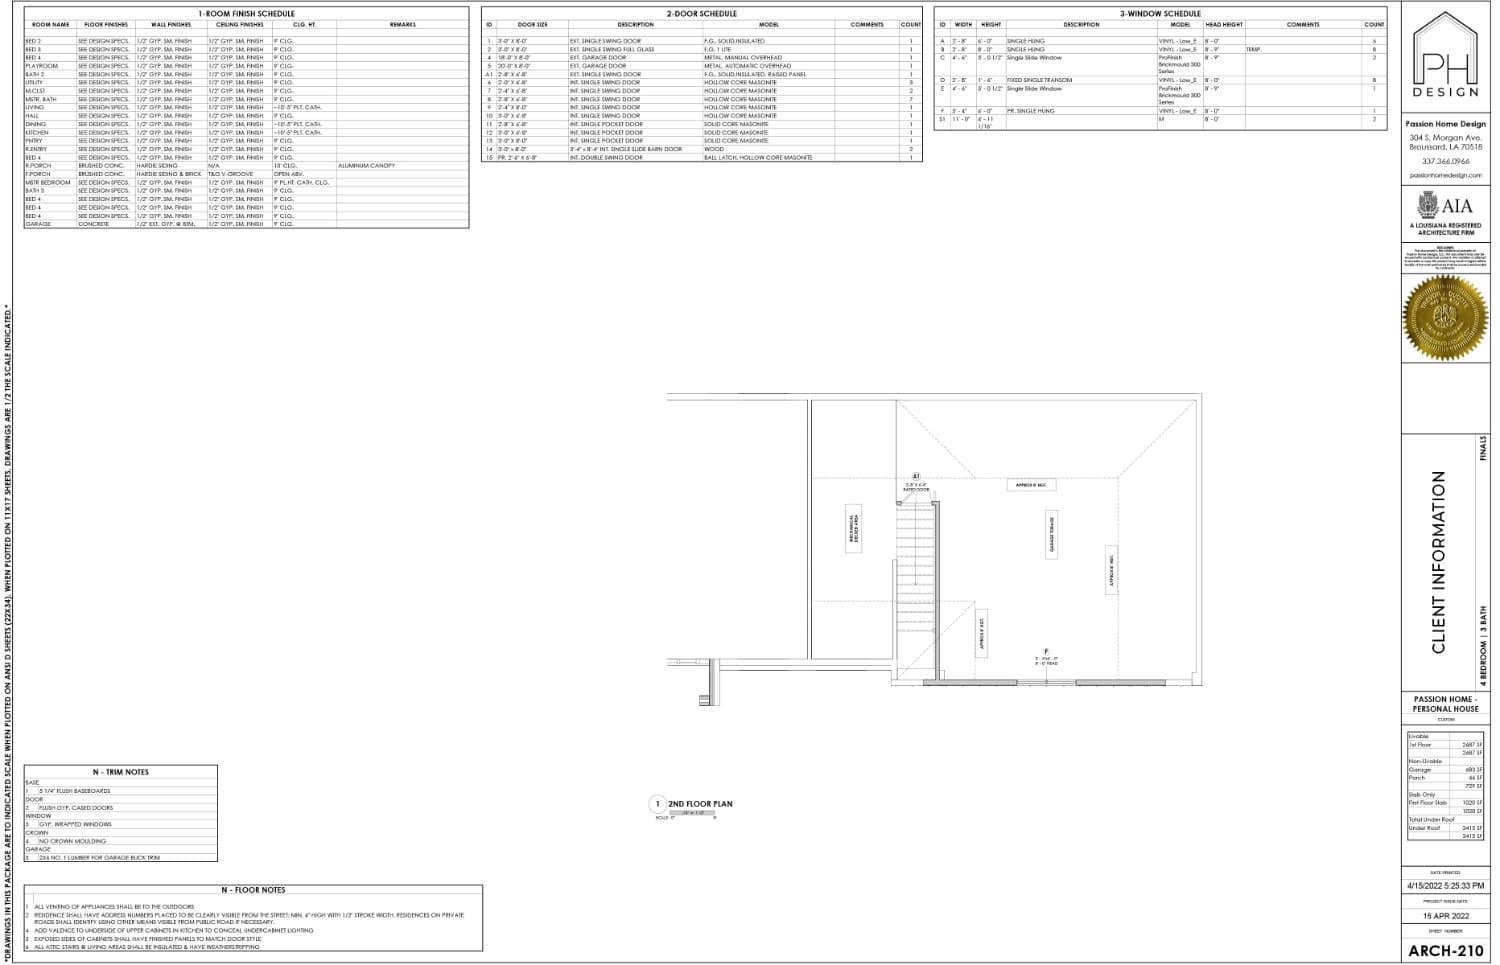 2nd floor plan page of blueprint plans